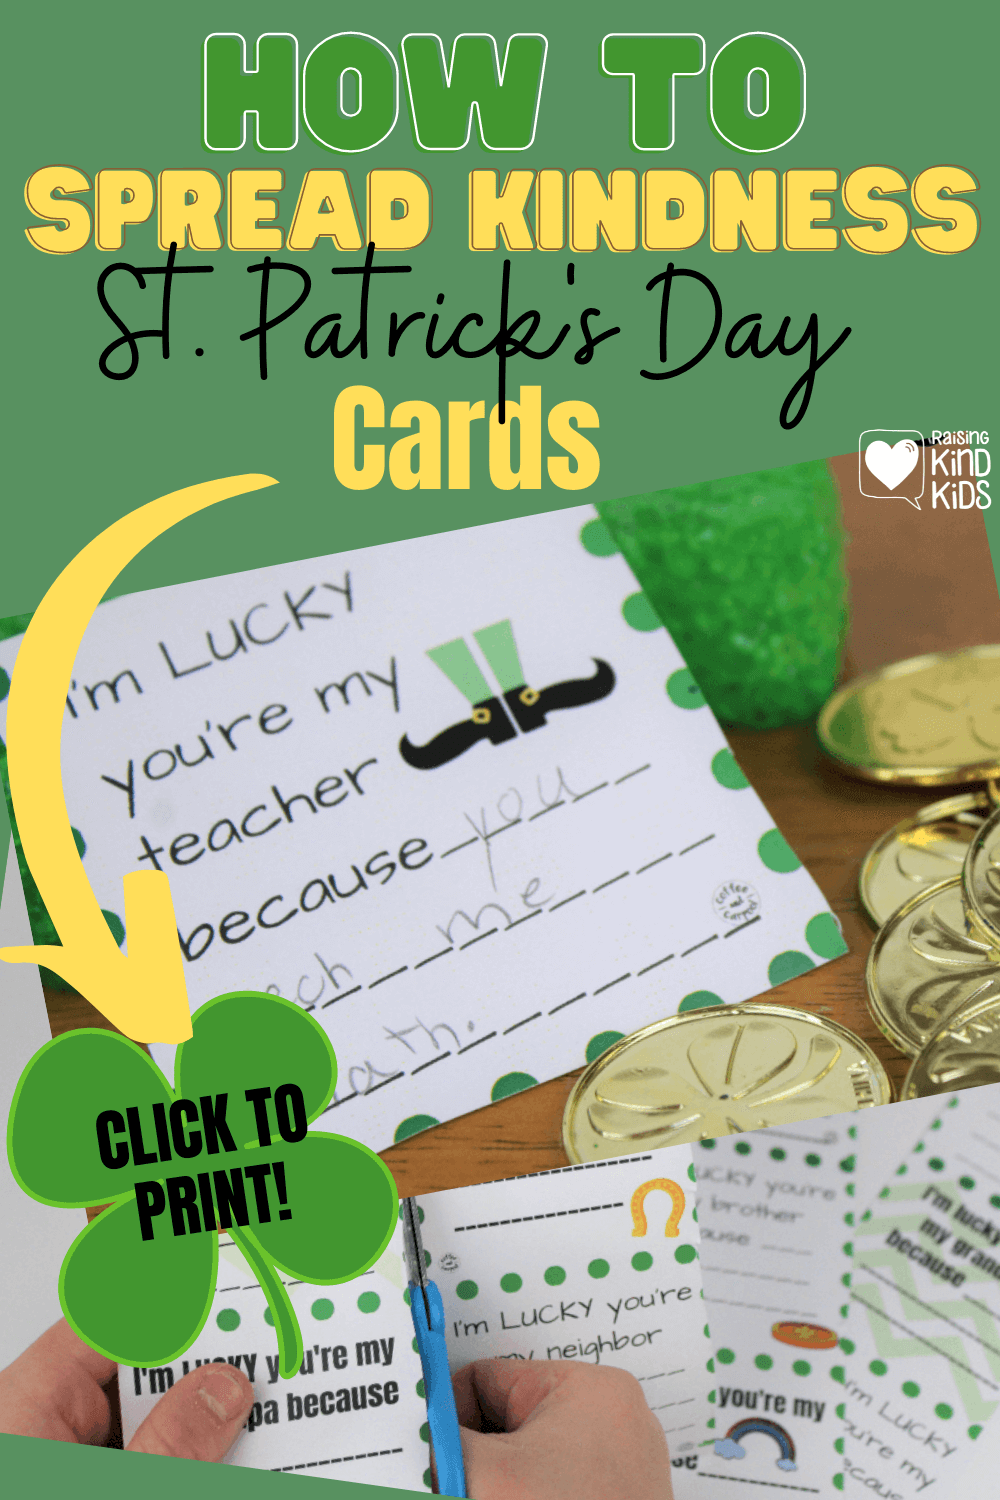 St. Patrick's Day cards for kids to make to help spread kindness to their family, friends and teacher. These are sweet and lucky kindness activities for kids. #kindnessactivities #stpatricksdayforkids #stpatricksday #kindness #raisingkindkids #printable